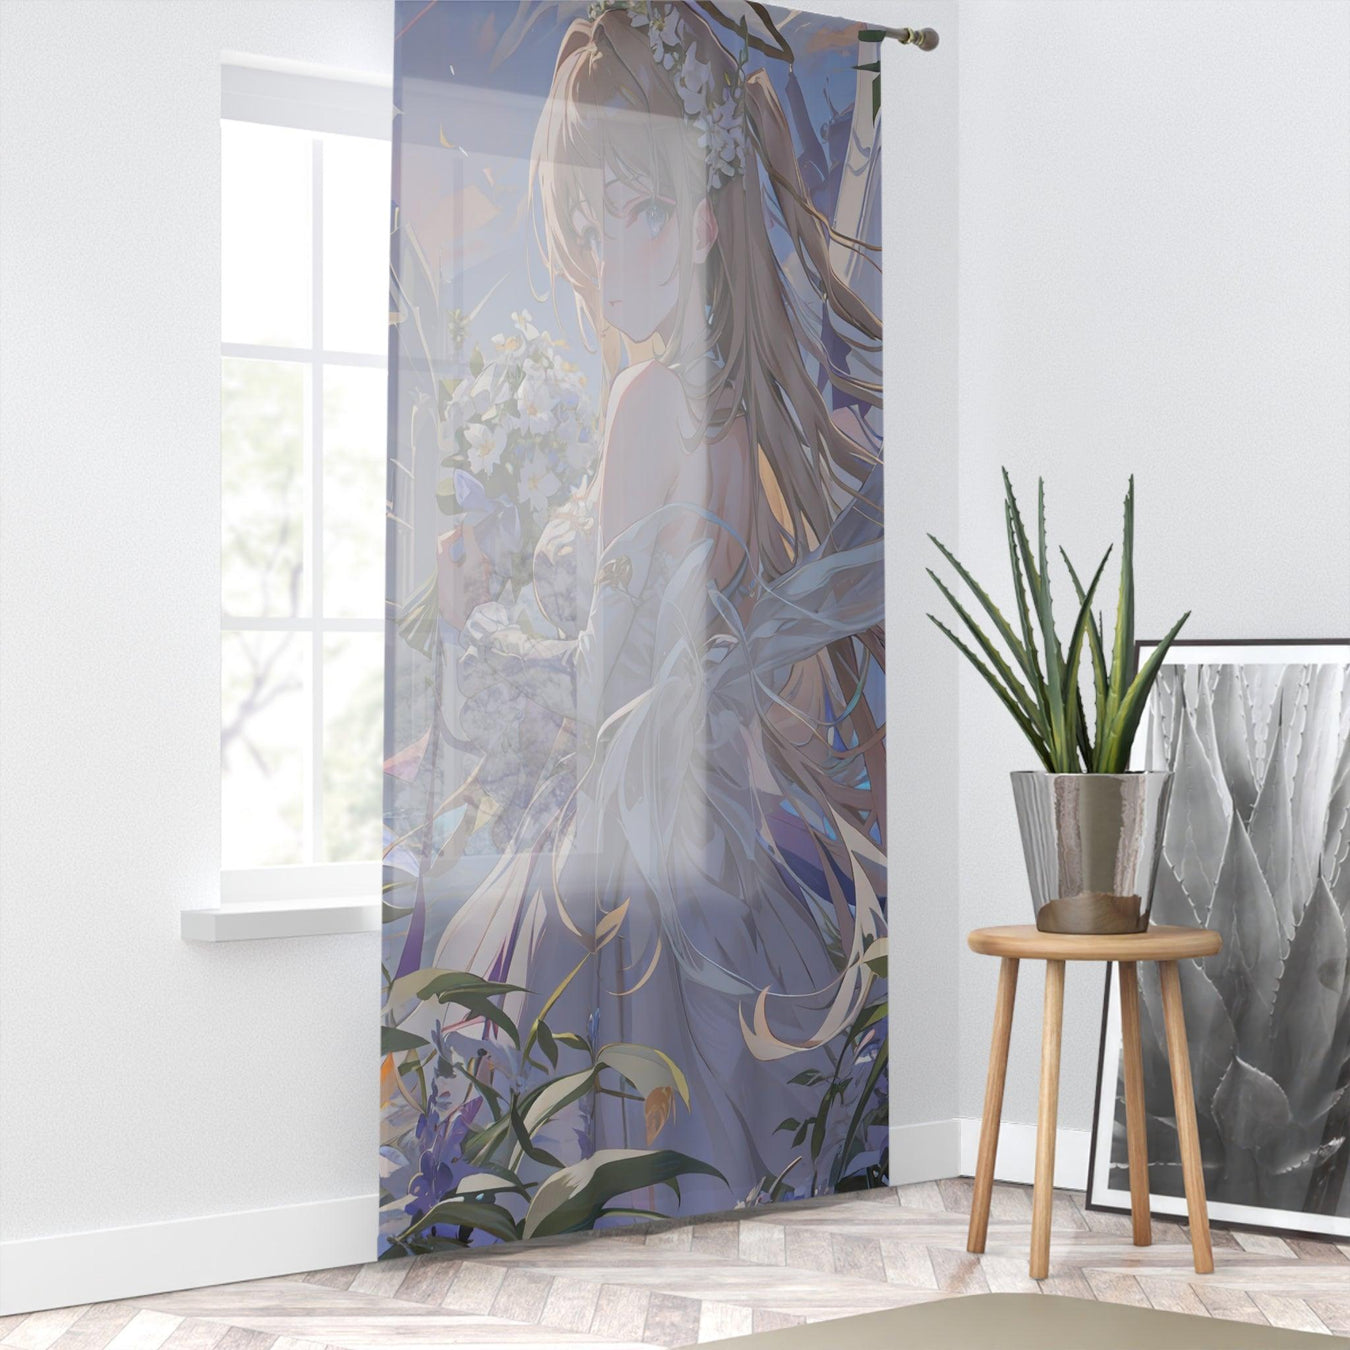 Fantasy 3D Anime Personalized Window Curtain